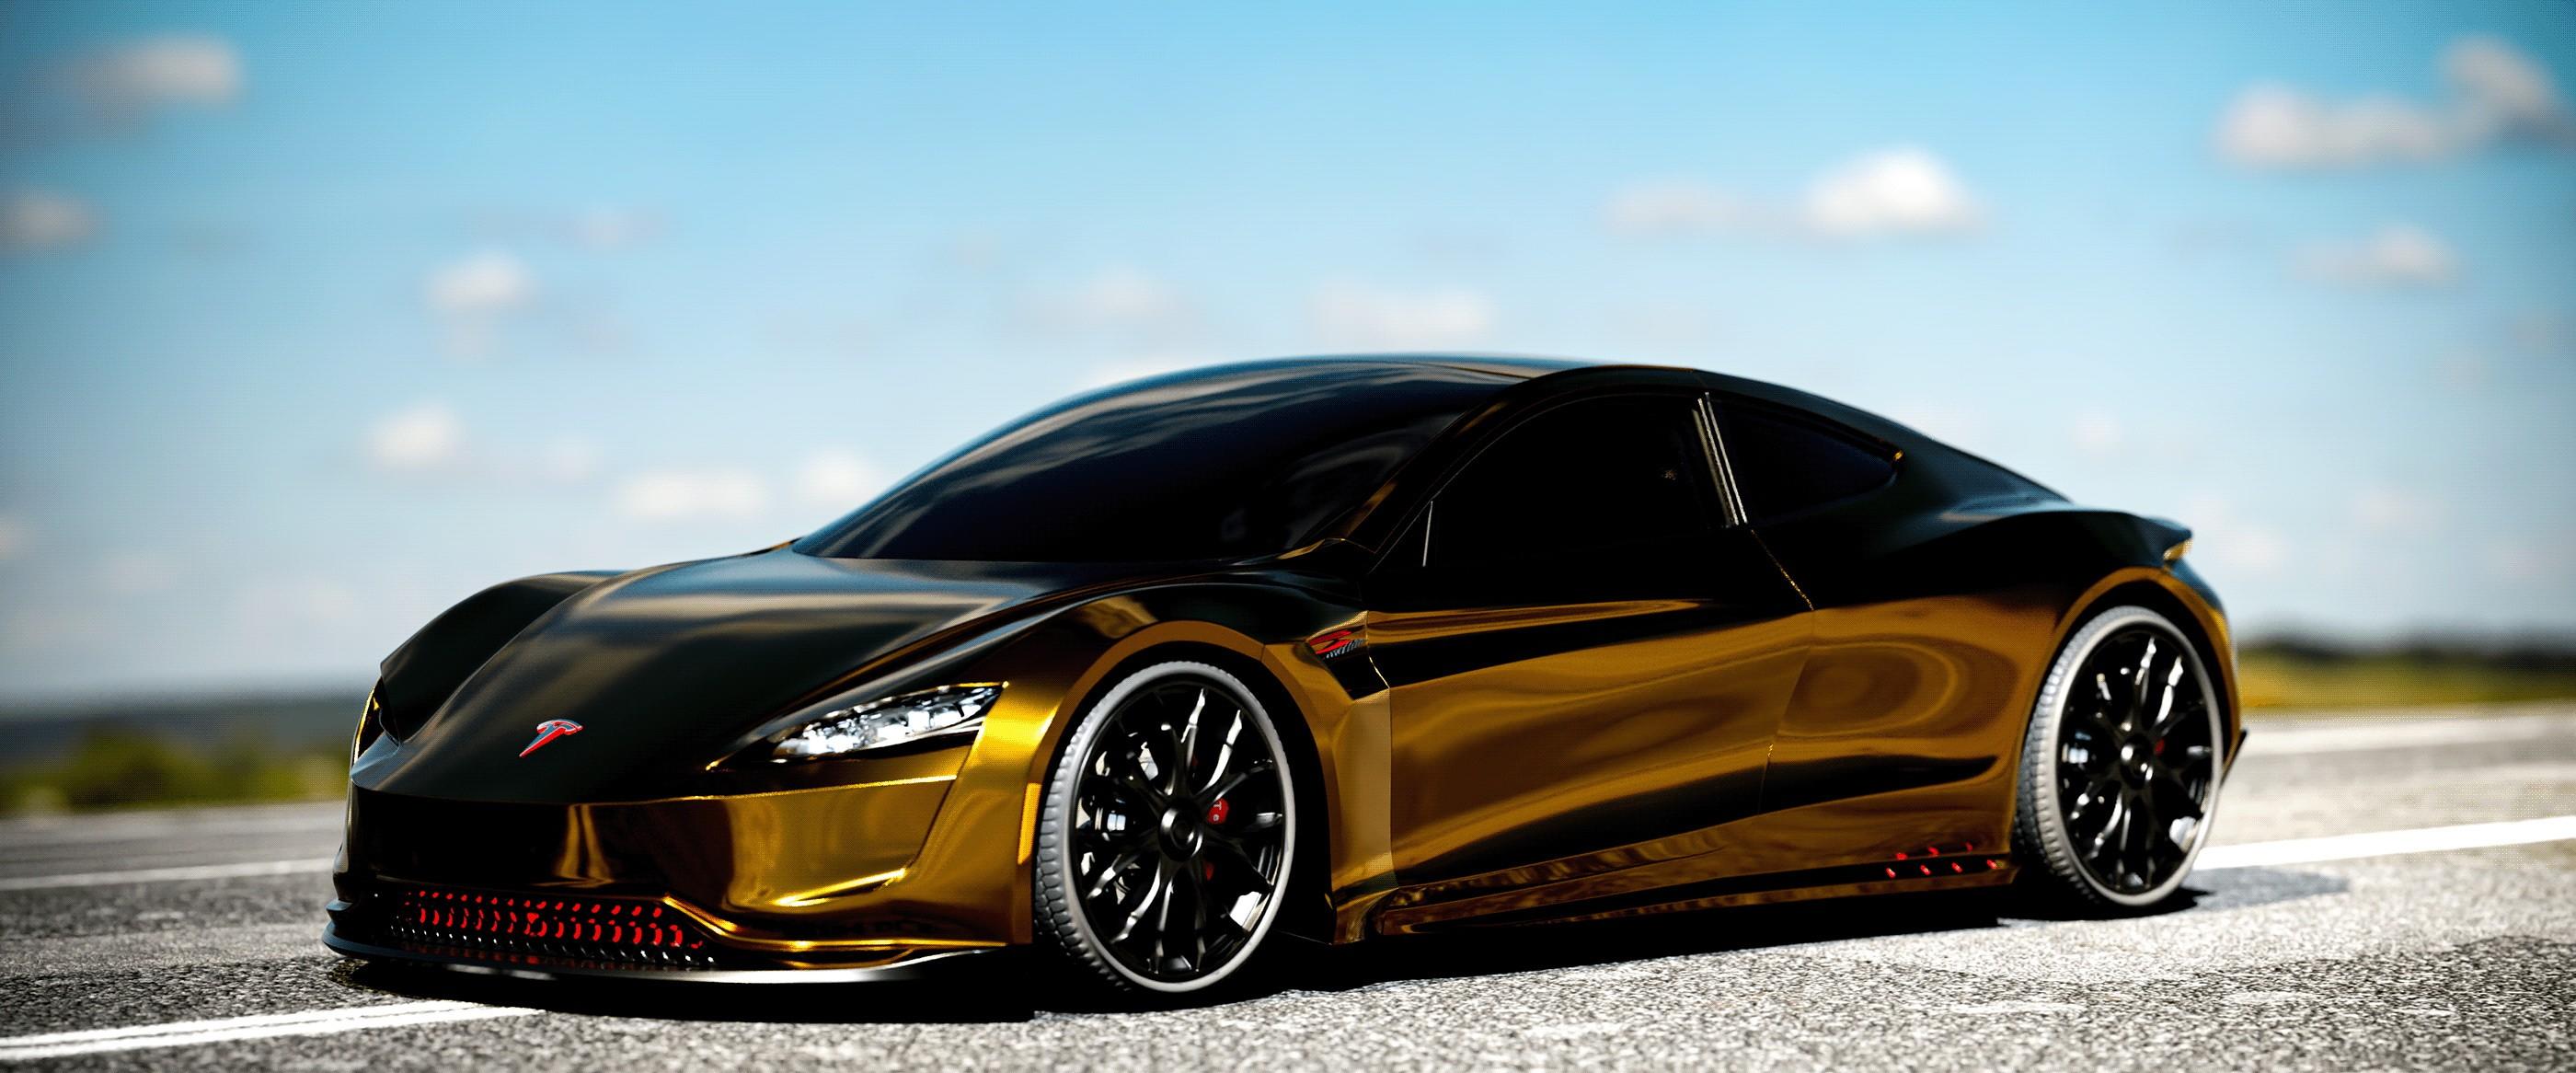 Tesla Roadster Gets Rendered In Gold For A Sheik S Pleasure